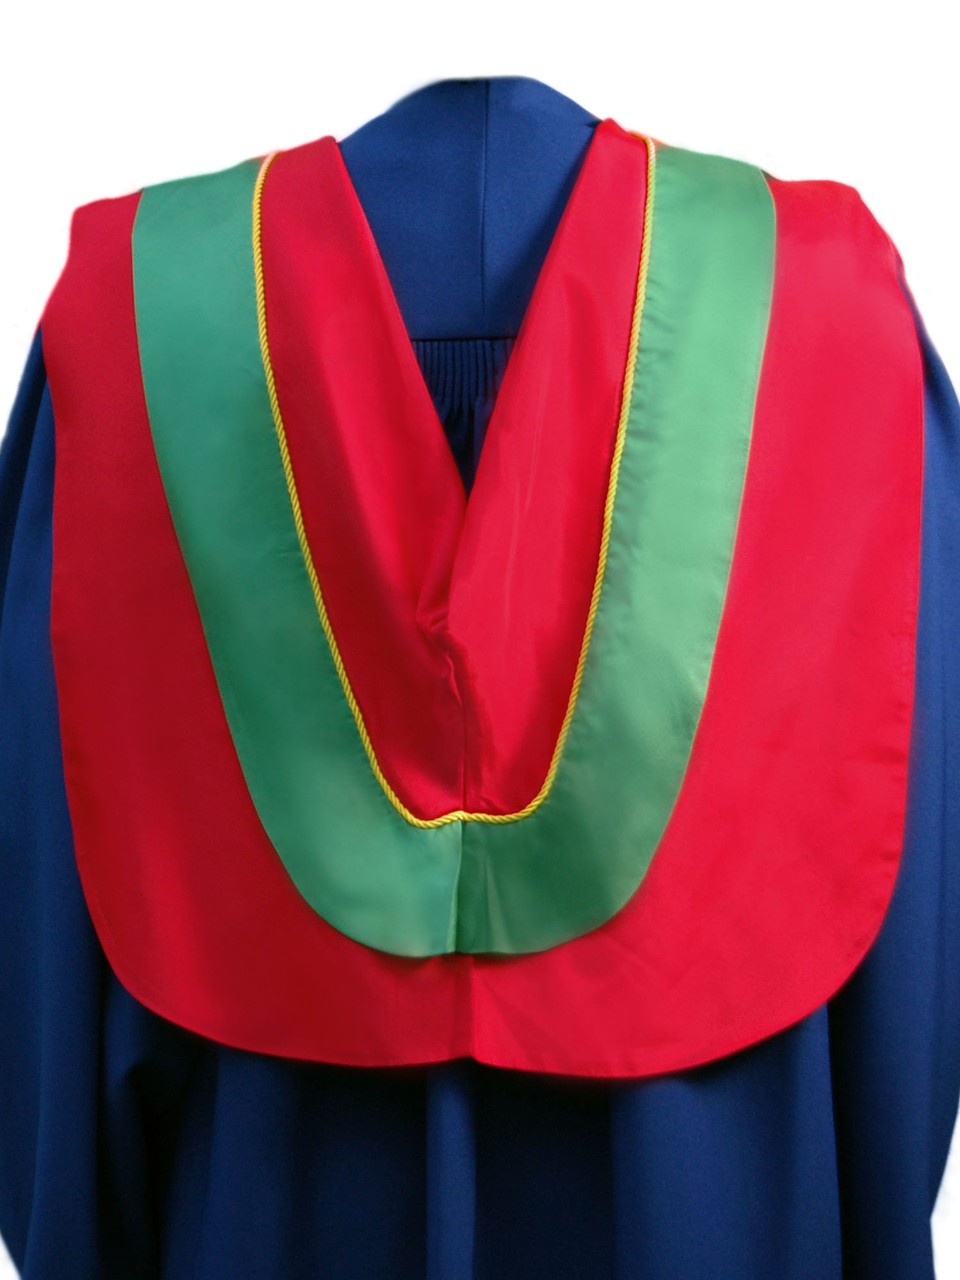 The Master of Resource Management hood is red with wide green border and gold cording